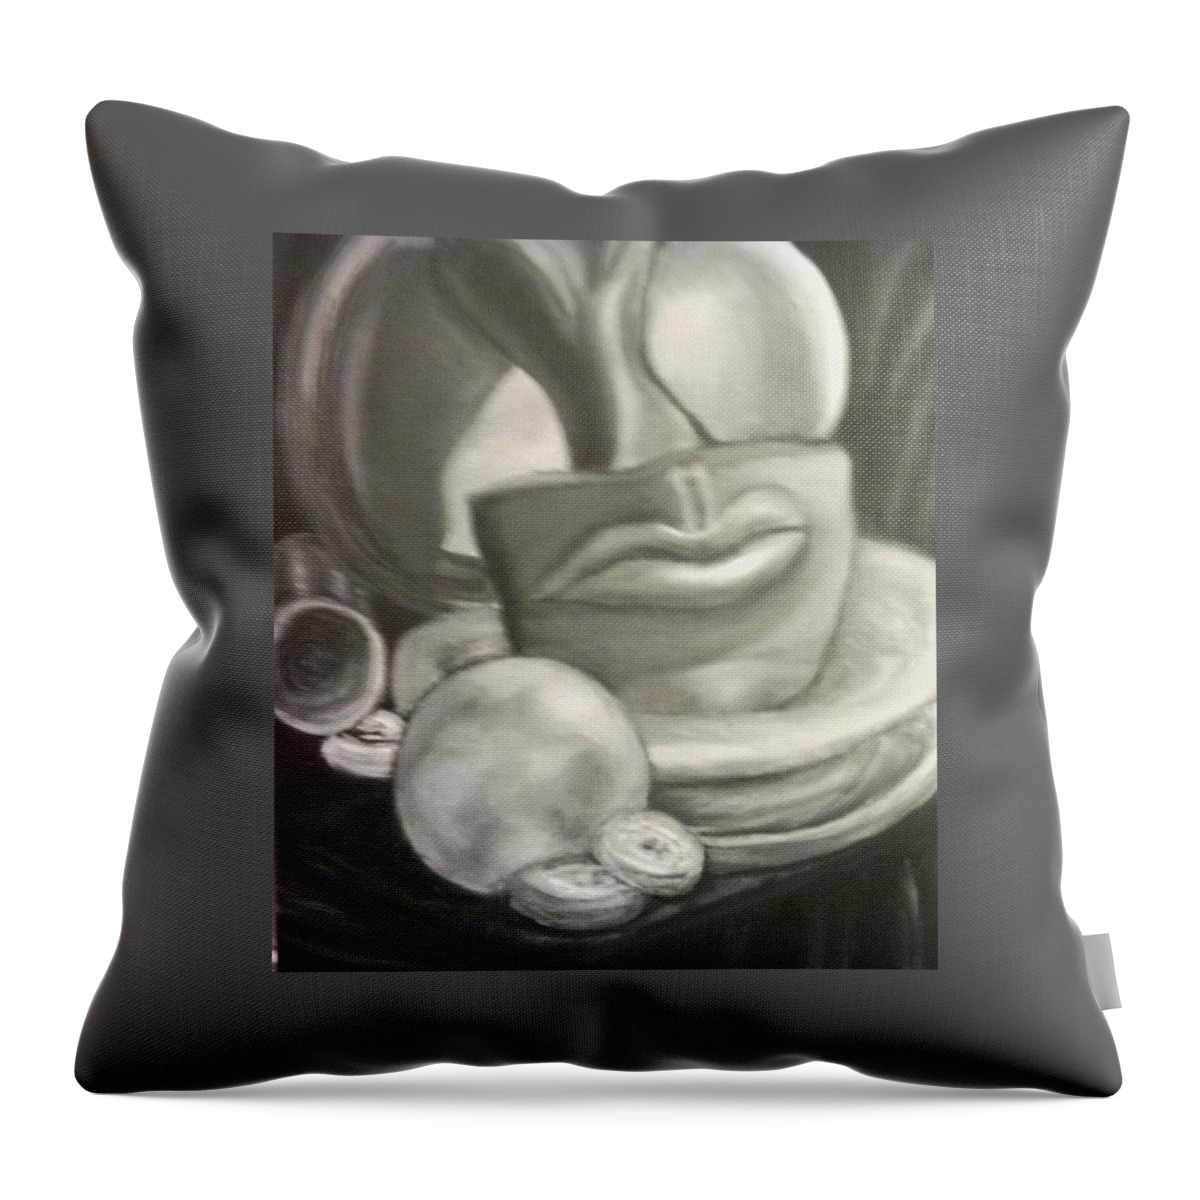 Surreal Abstract- Kissable Lips-powdered Doughnuts Throw Pillow featuring the painting Oral Fixation by Suzanne Berthier